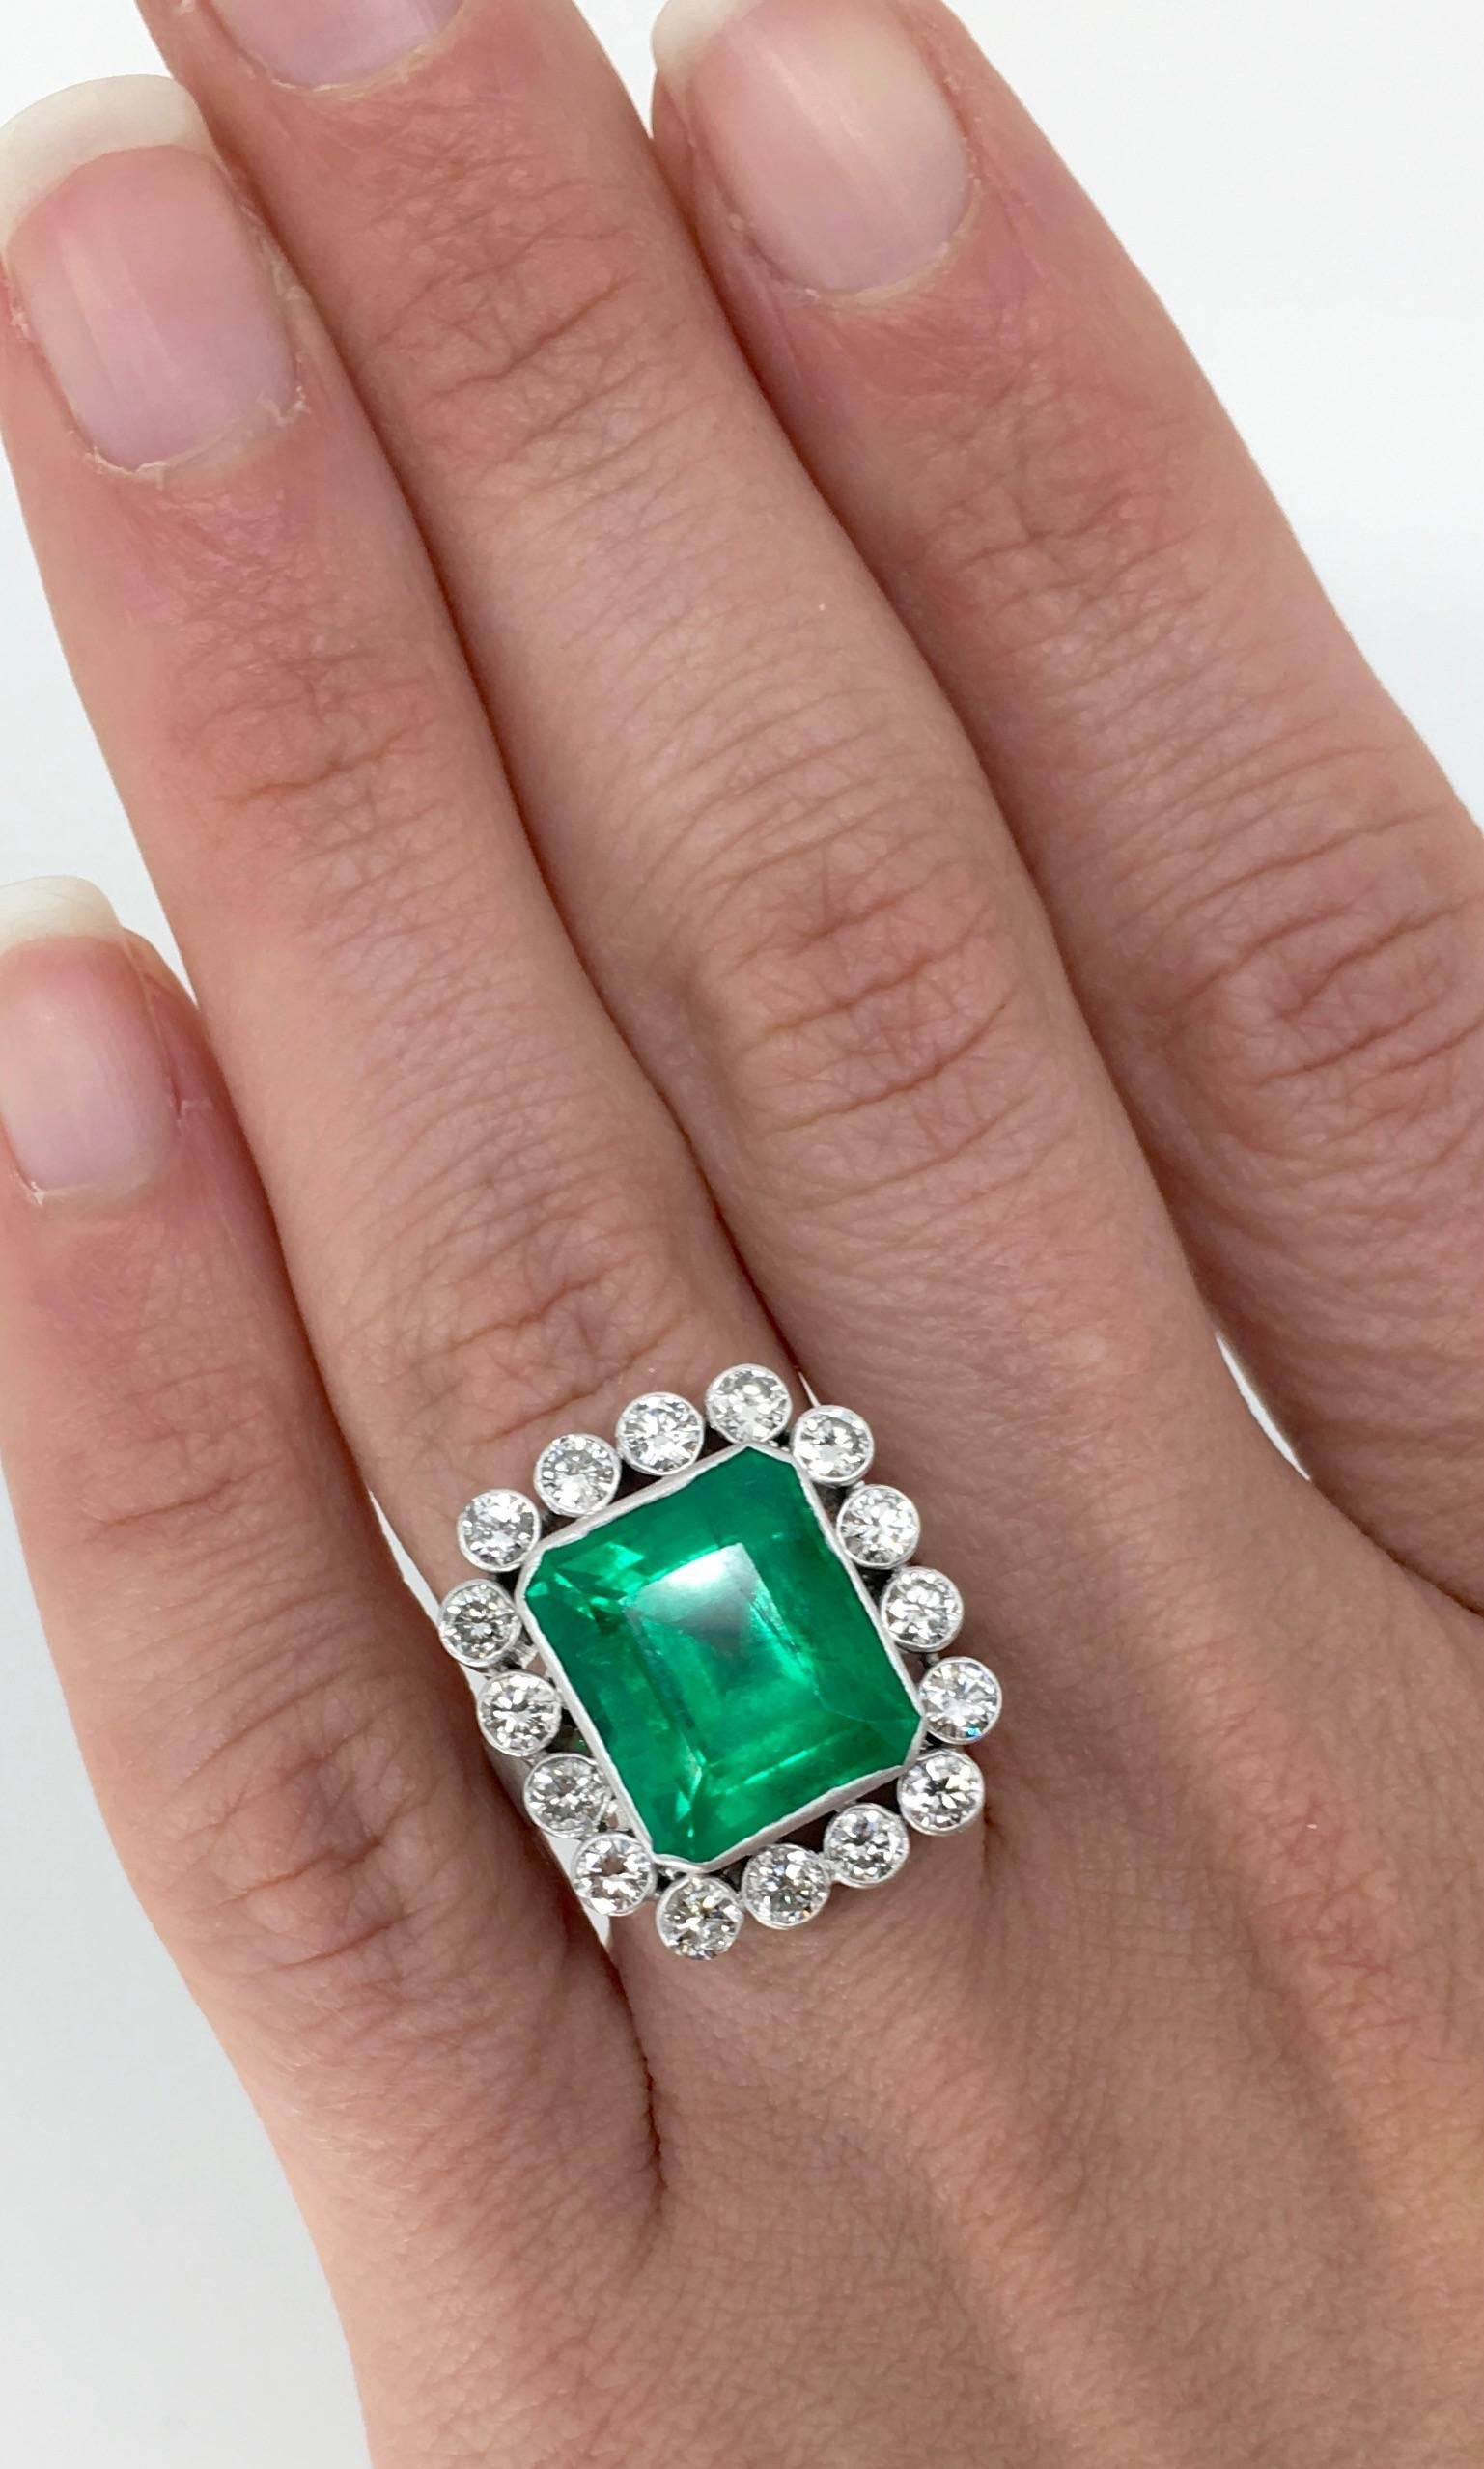 Custom made ring features an Columbian Octagonal Step Cut Emerald, 12.60 X 10.90 X 8.72 MM in size. There are 16 Round Brilliant Cut Diamonds beautifully set in a halo accenting the featured Emerald. The diamonds display G-J color and I1-I2 clarity.